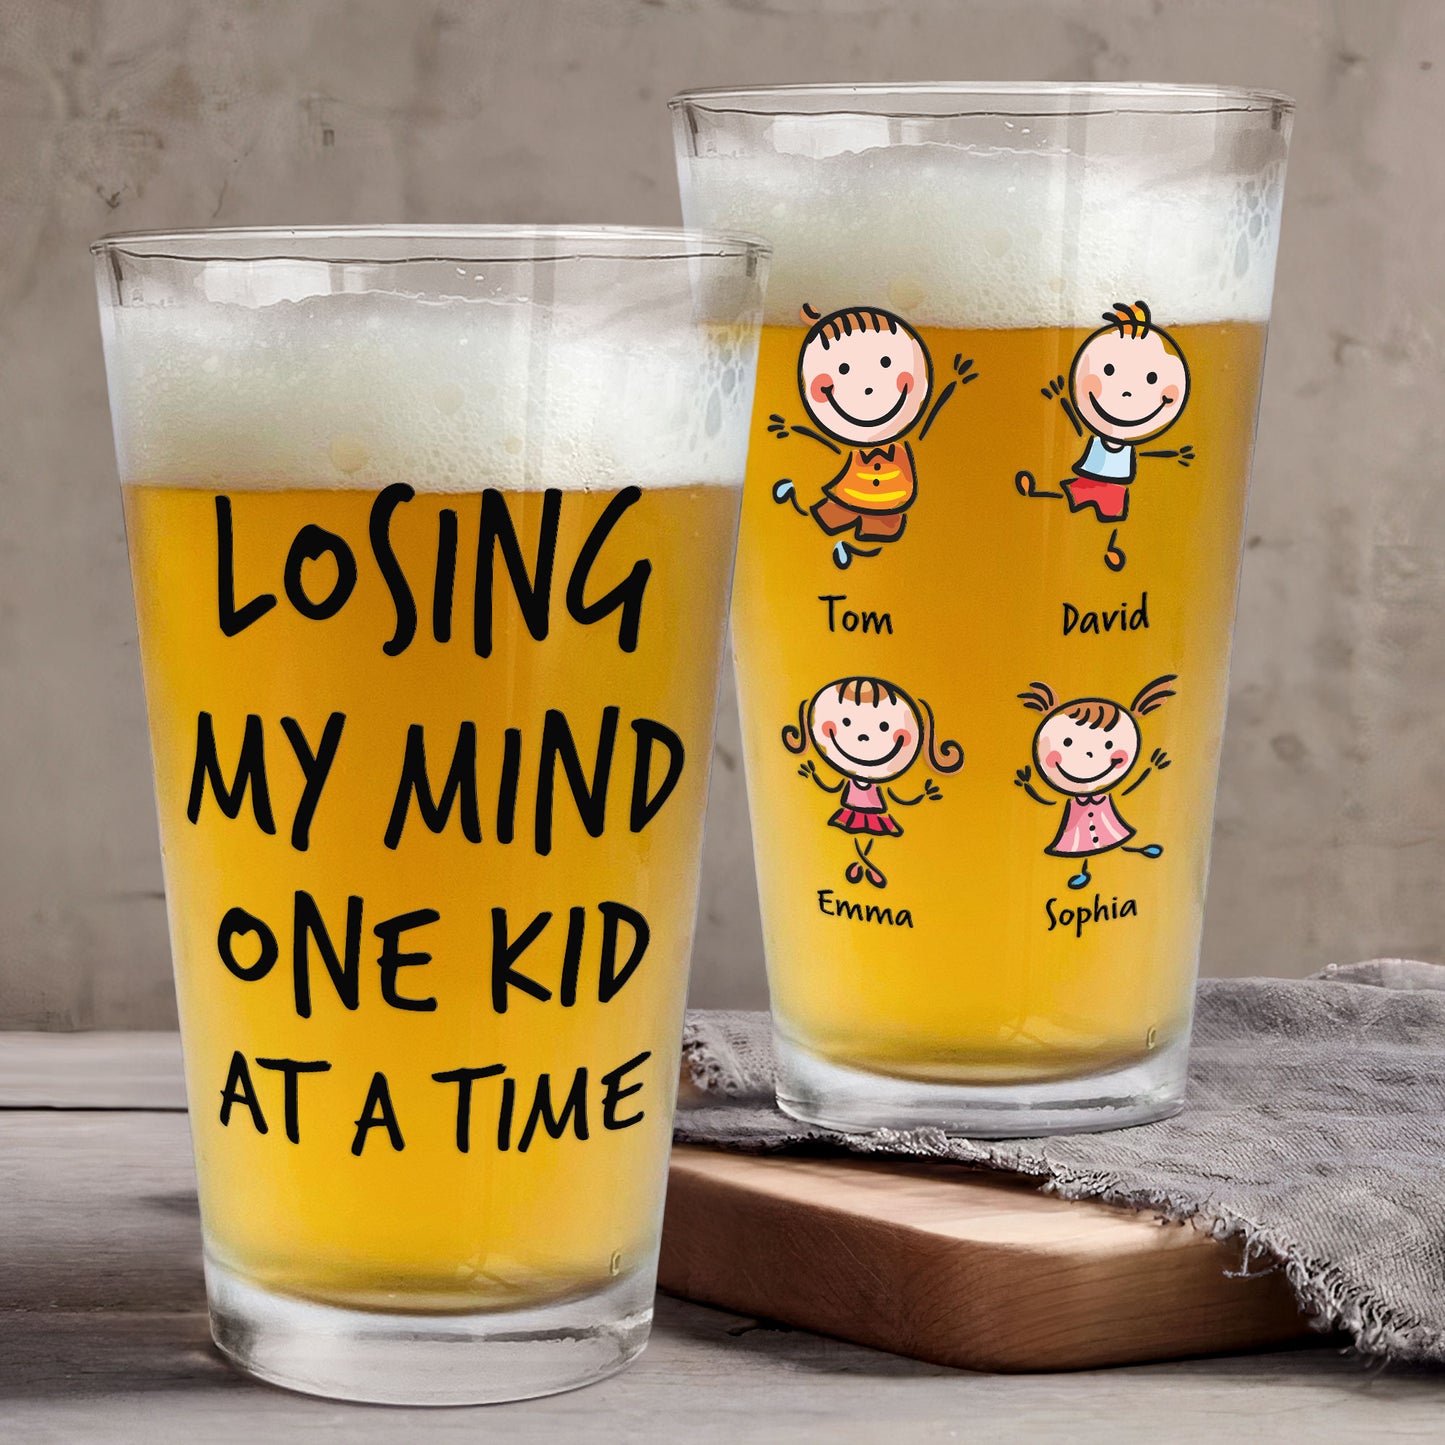 Losing My Mind One Kid At A Time - Personalized Beer Glass